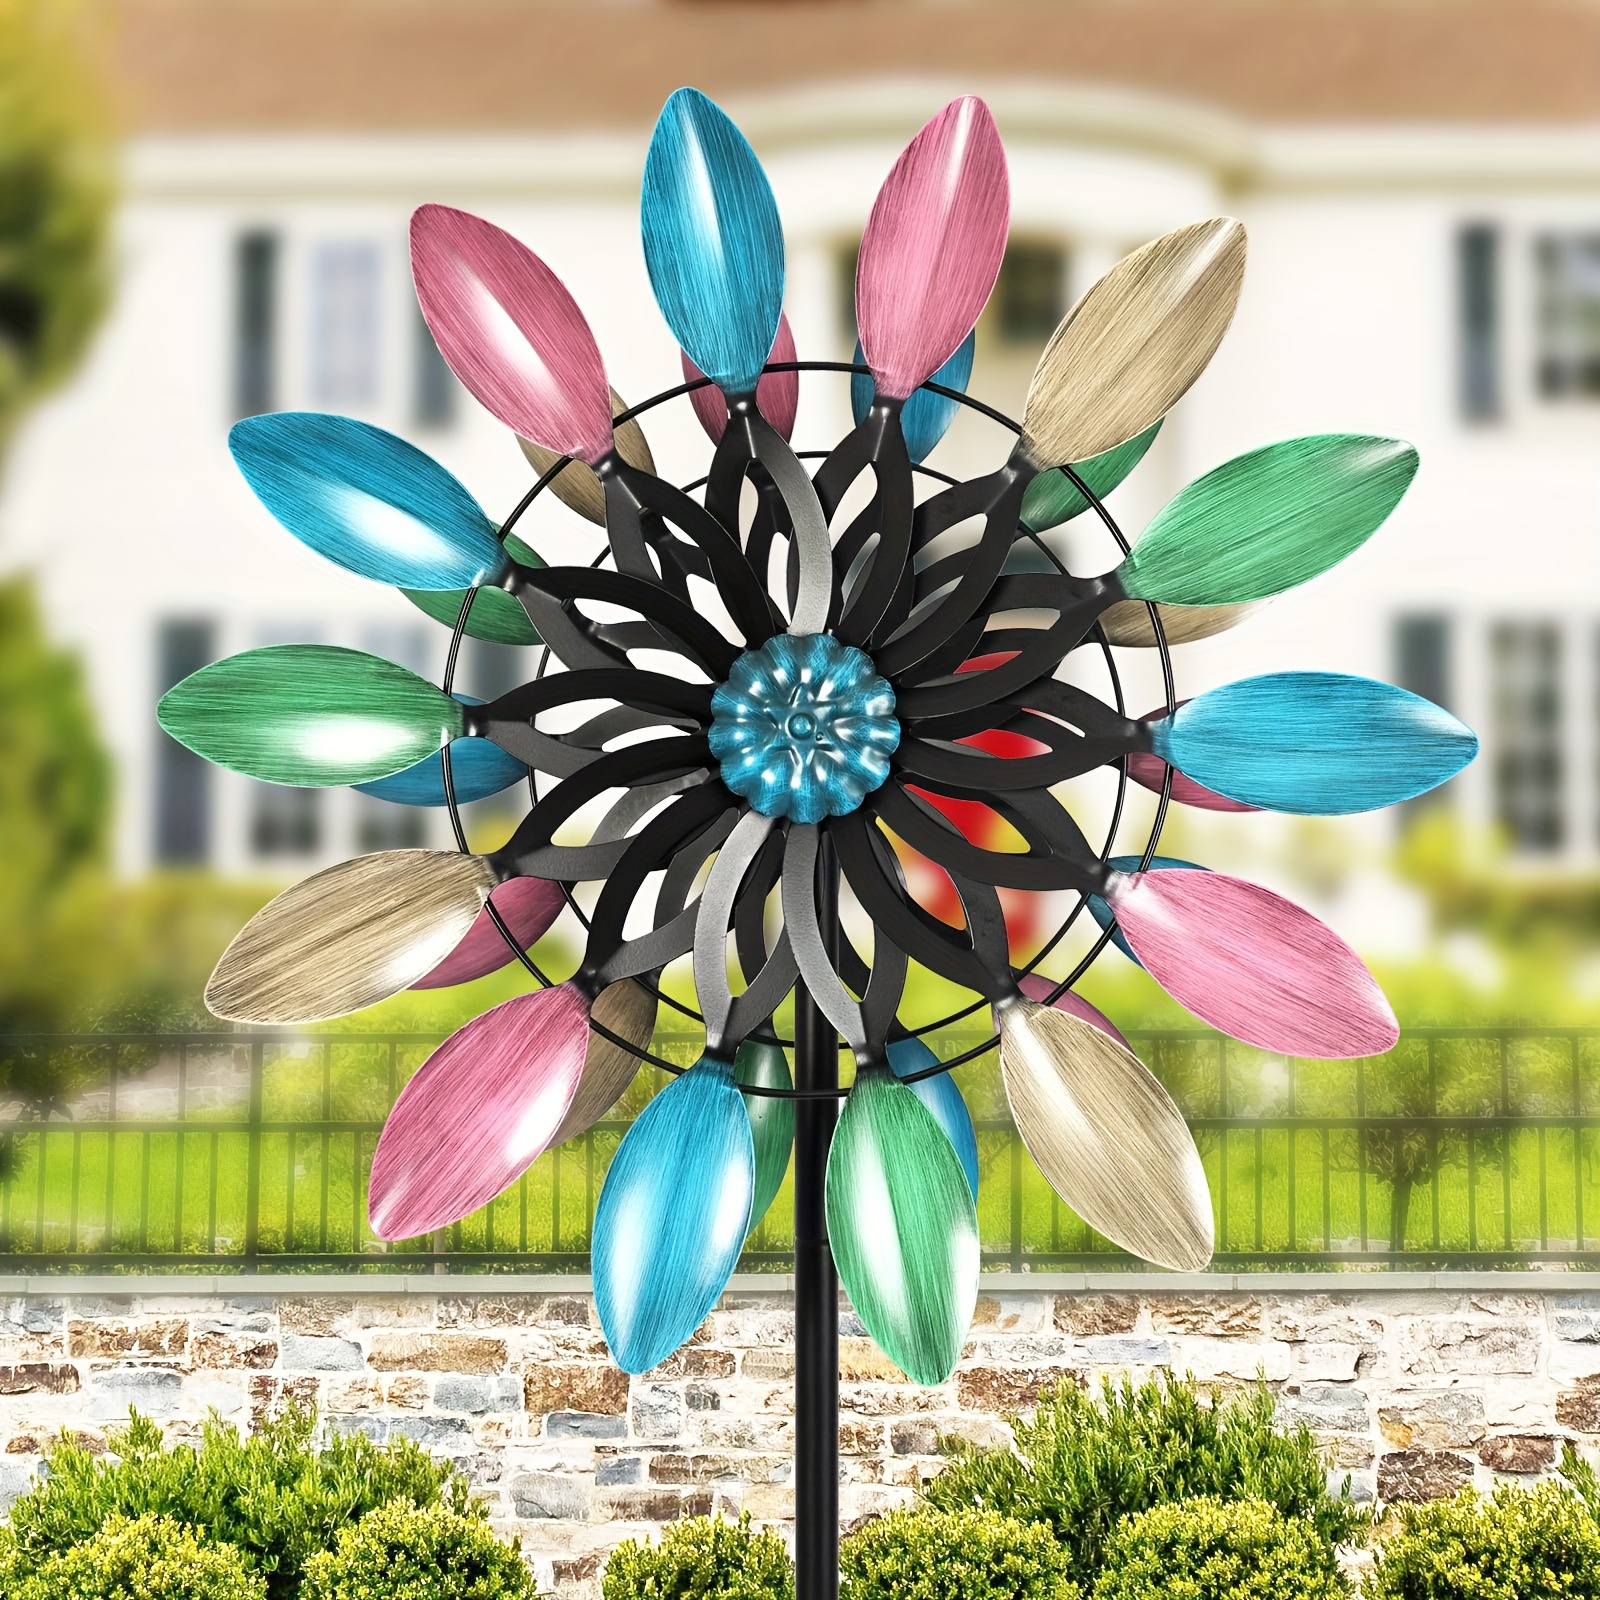 

Wind Spinnerlarge Outdoor Wind Spinner For Patio And Garden Decorations With Fixing Stakes Metal Garden Spinner Lawn Decoration Windmill